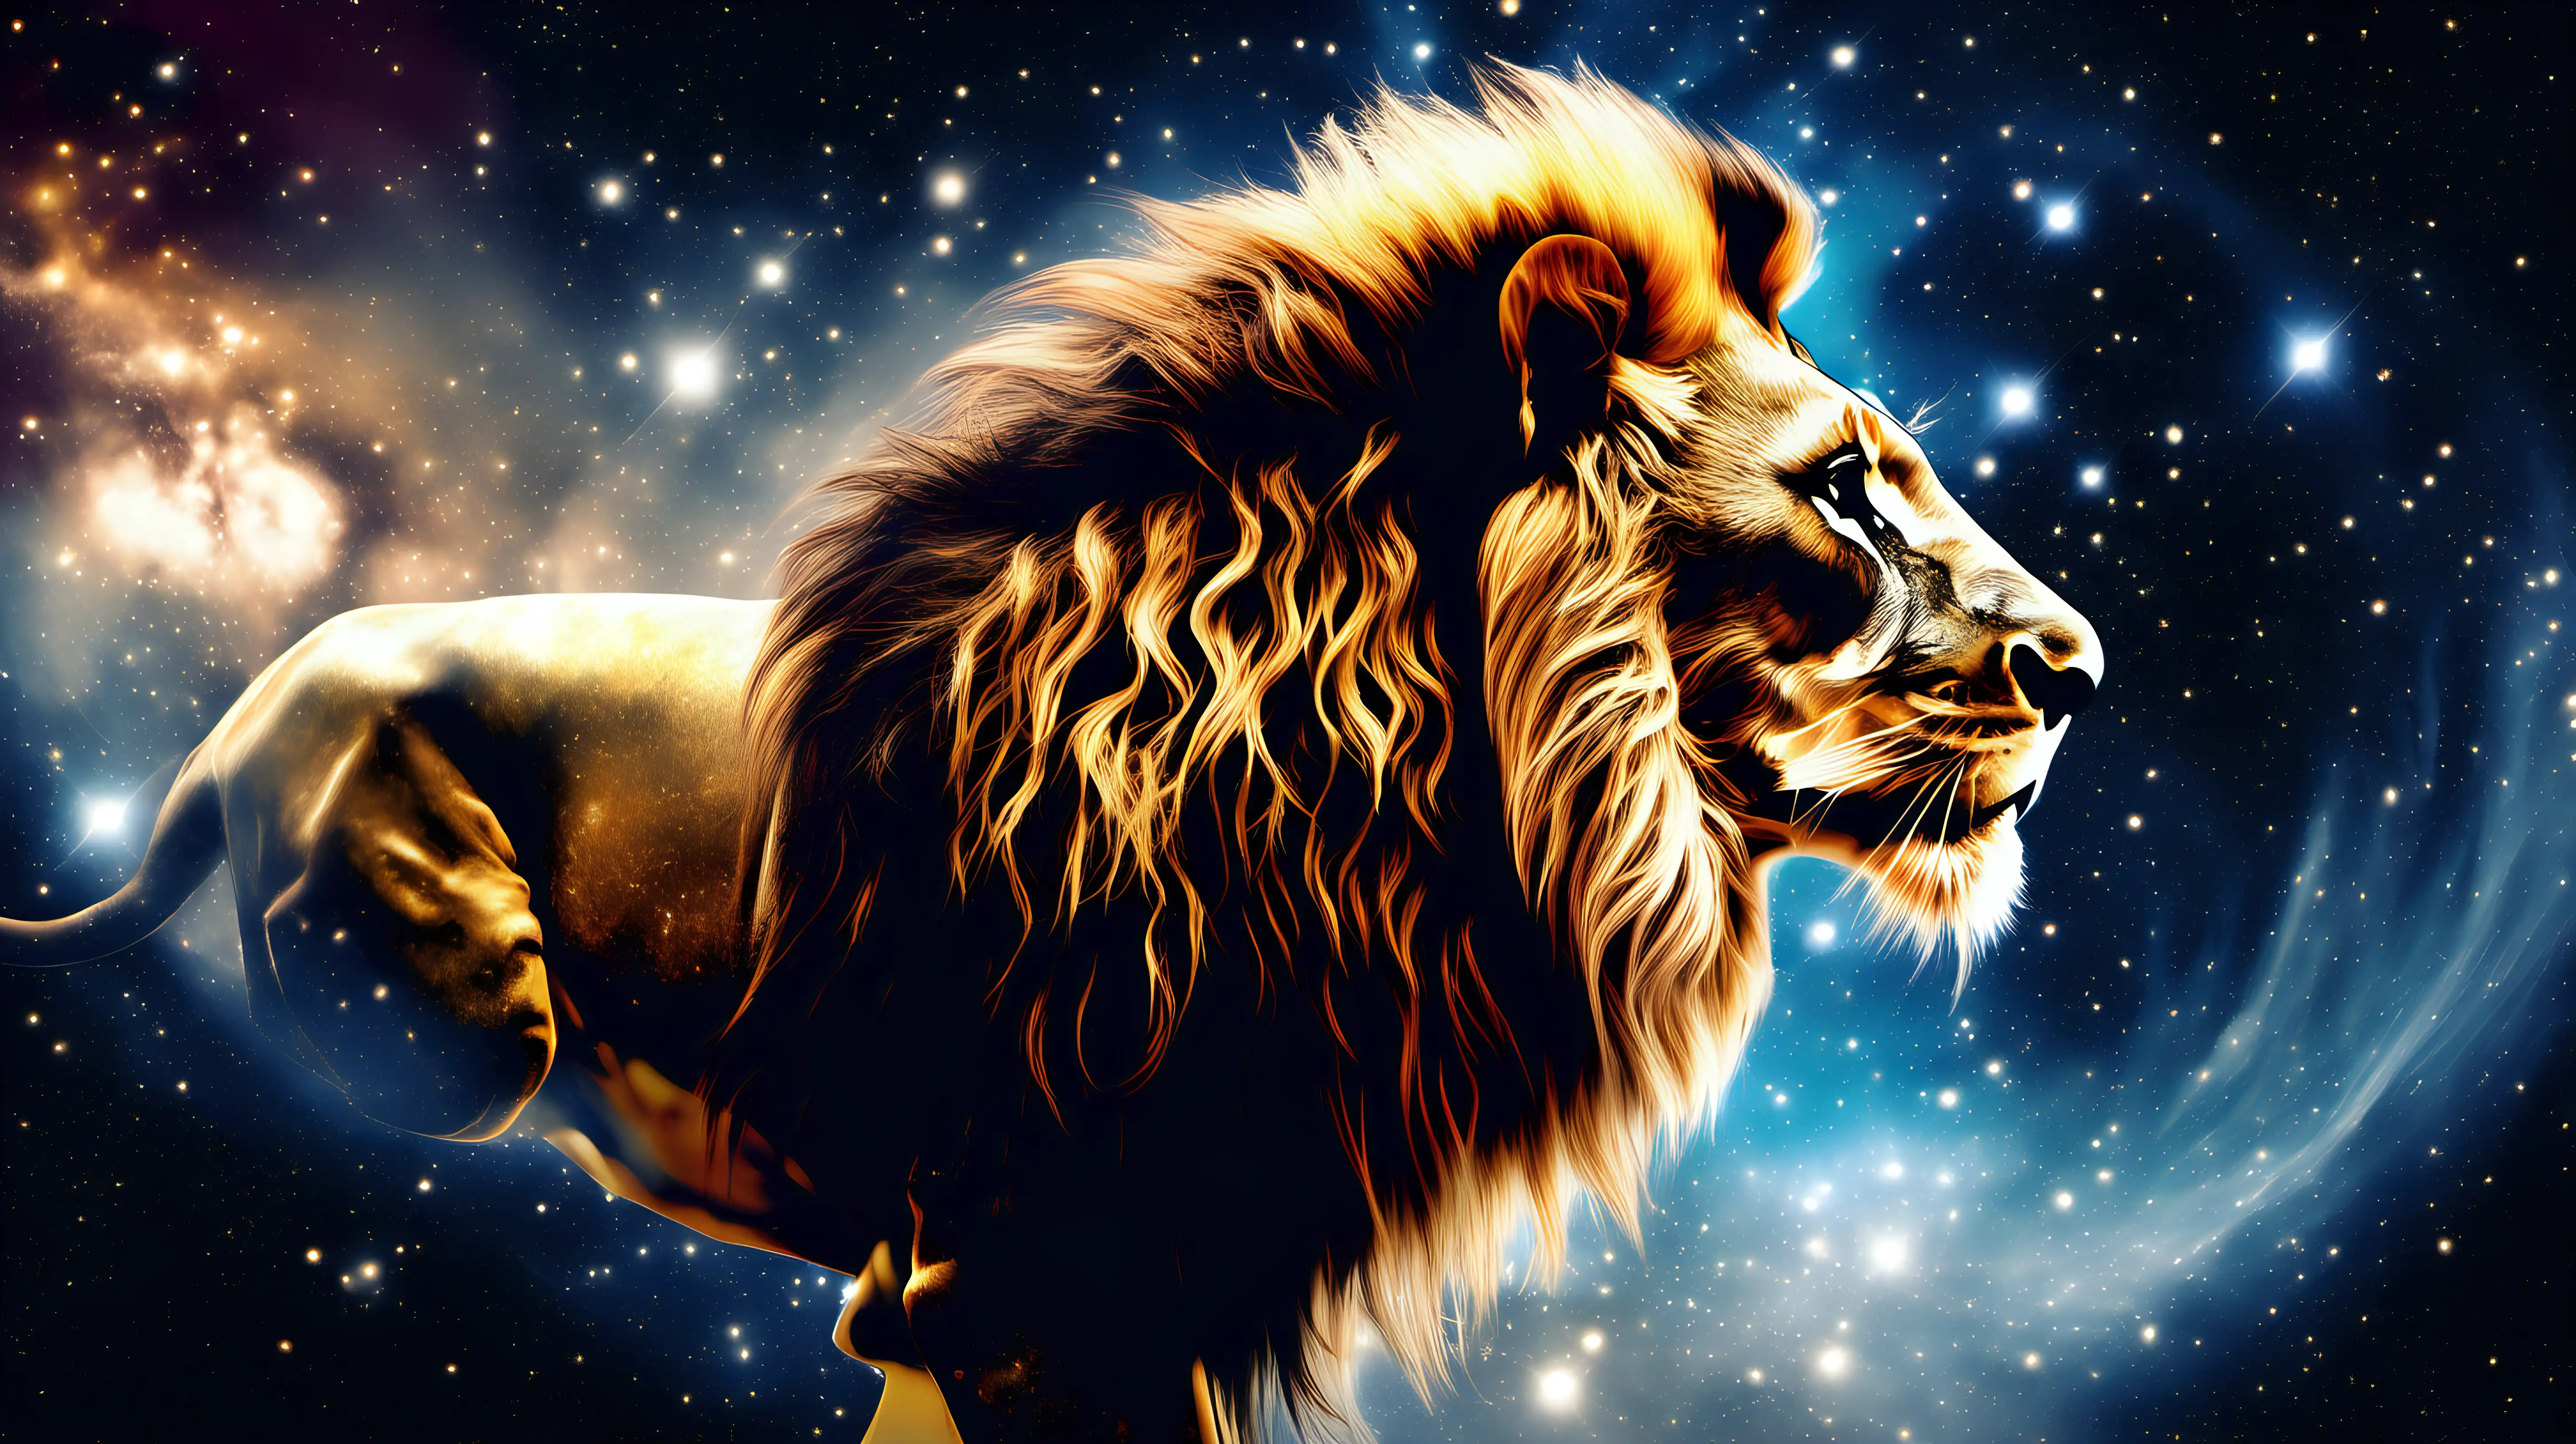 Dynamic Lion Leap through Stardust Embodying Limitless Exploration